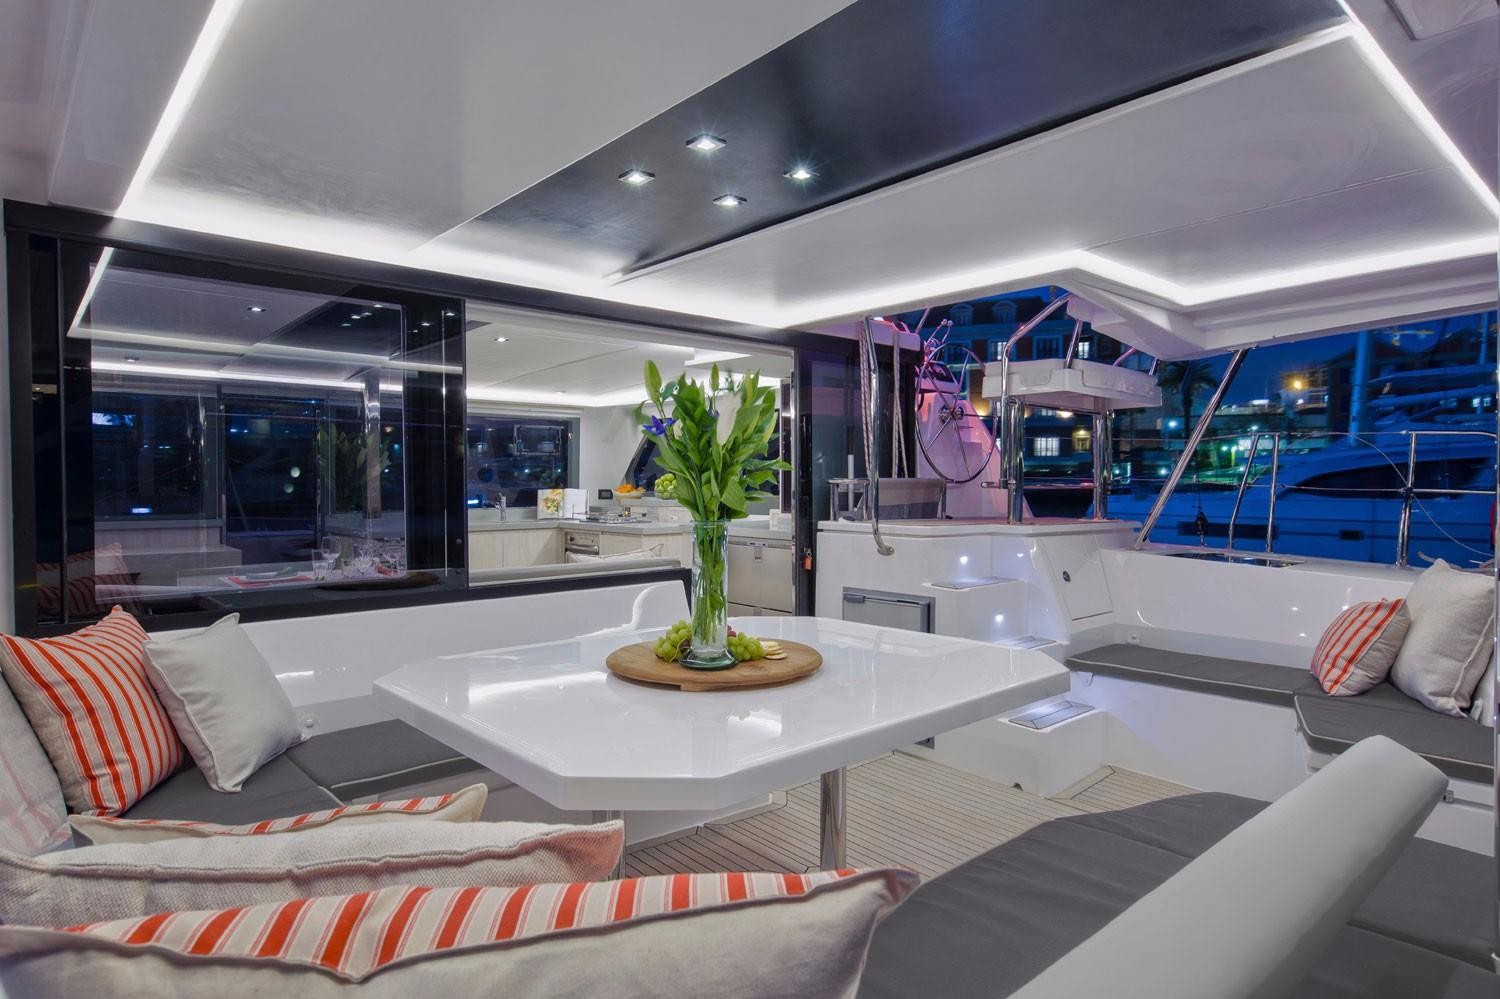 New Sail Catamaran for Sale 2020 Leopard 45 Layout & Accommodations